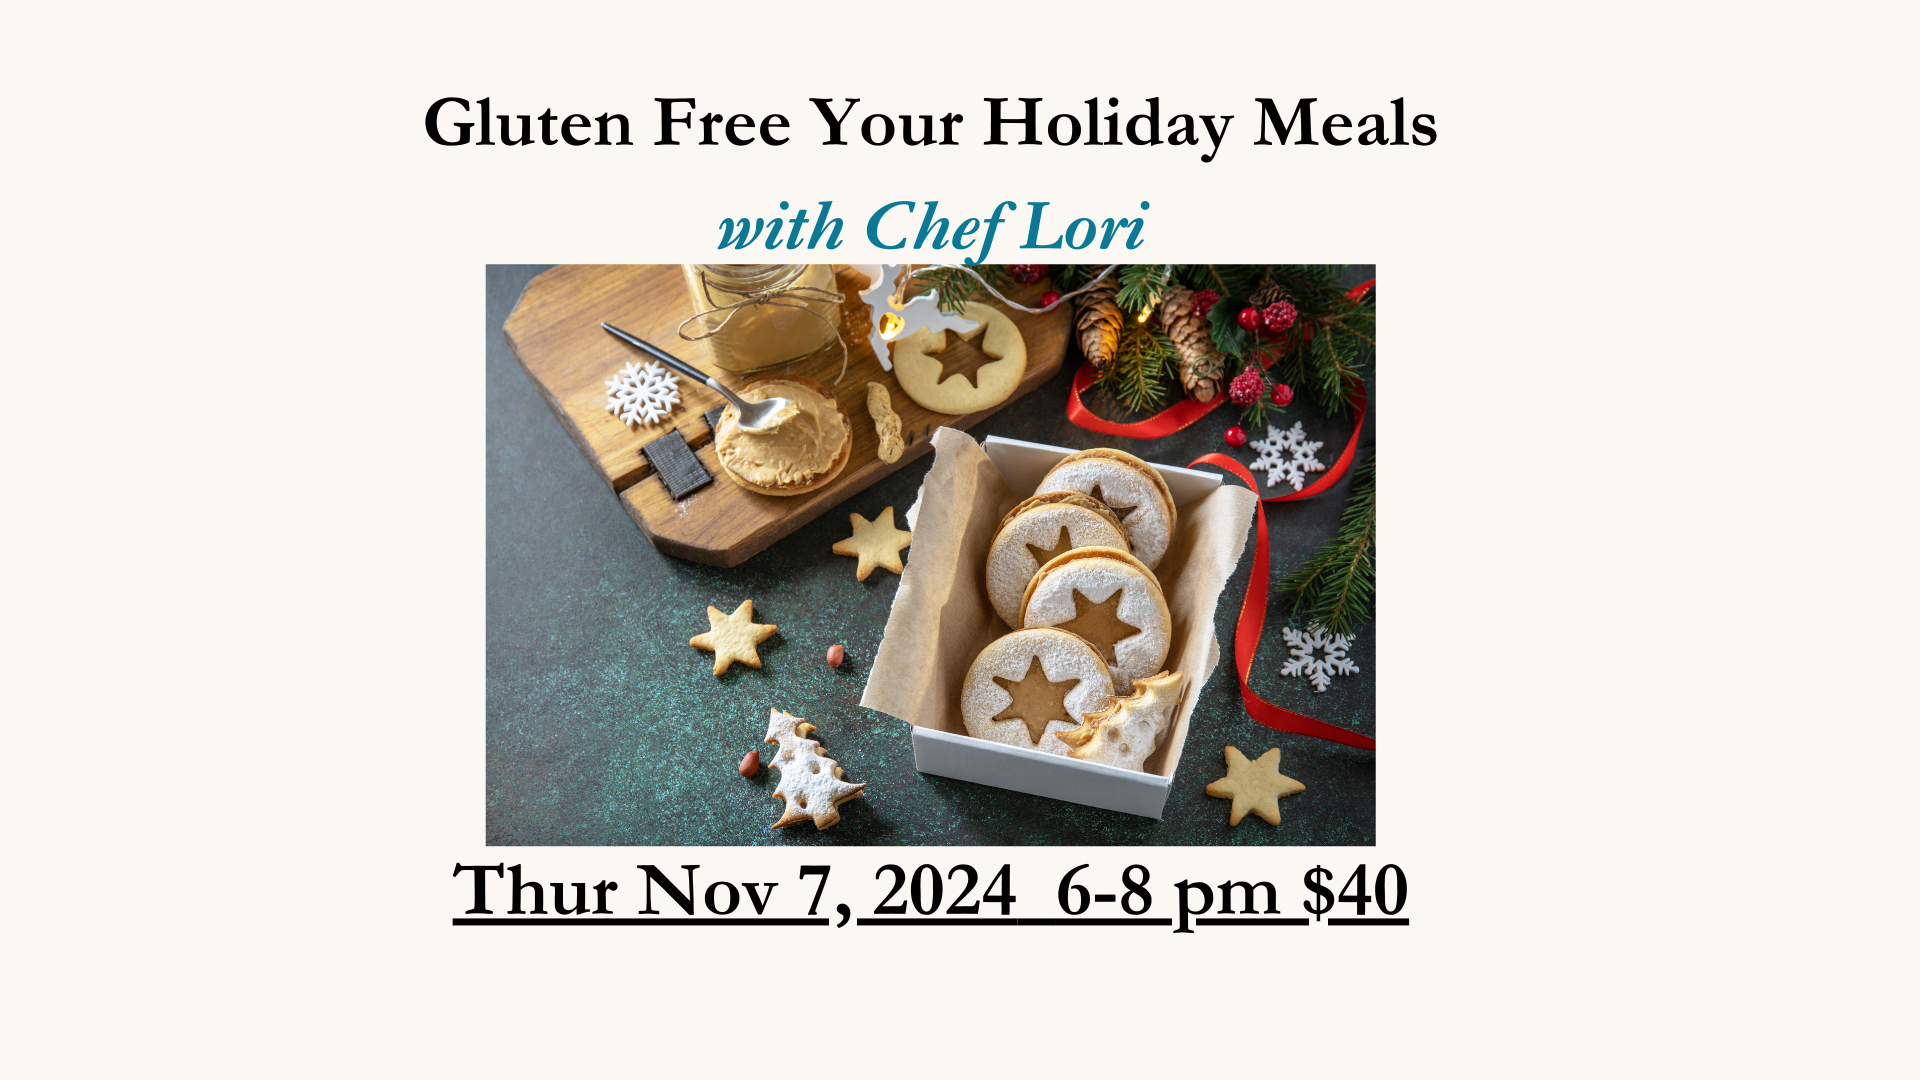 Gluten Free Your Holiday Meals Nov 7, 2024 6-8pm $40